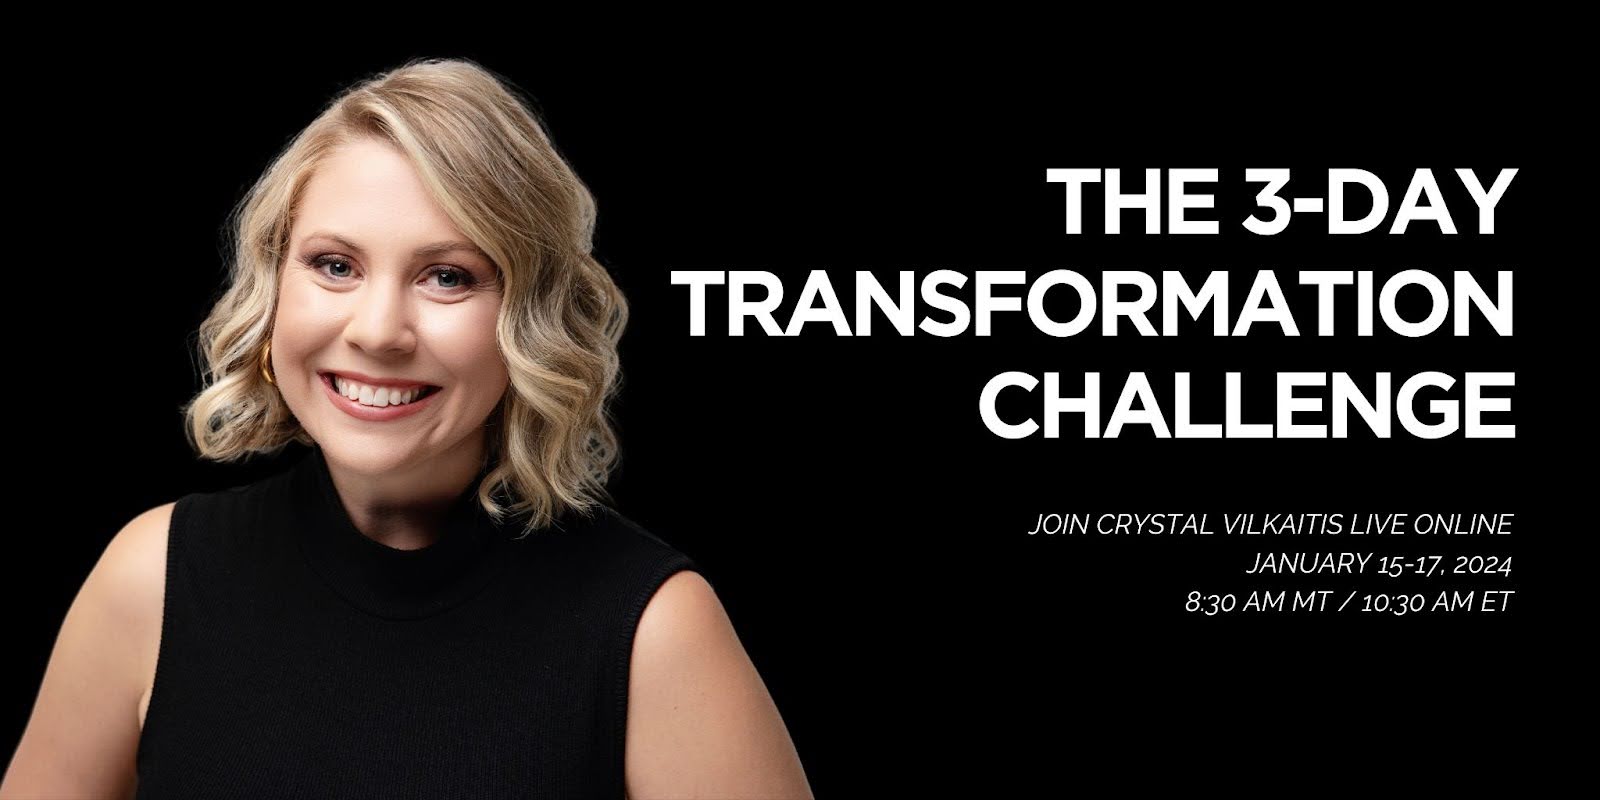 Join the 3-Day Transformation Challenge! 💪

A brand new year is the perfect time for a fresh start. 😊Say goodbye to stagnant results and embark on a transformative journey with The 3-Day Transformation Challenge, where you'll shift from feeling stuck, unclear, or achieving average results to experiencing your most energized, fun, and successful year yet.

Join me LIVE via zoom January 15-17, 2024 at 8:30 am MT / 10:30 am ET.

This challenge is not just about transformation; it's about setting the stage for a year of remarkable success, invigorated spirit, and enjoyable endeavors in both your personal and professional life. 📊

👉 Register for free: http://crystalmediaco.com/transform 

#smallbusinessowner #socialmediachallenge #smallbusinessmarketing